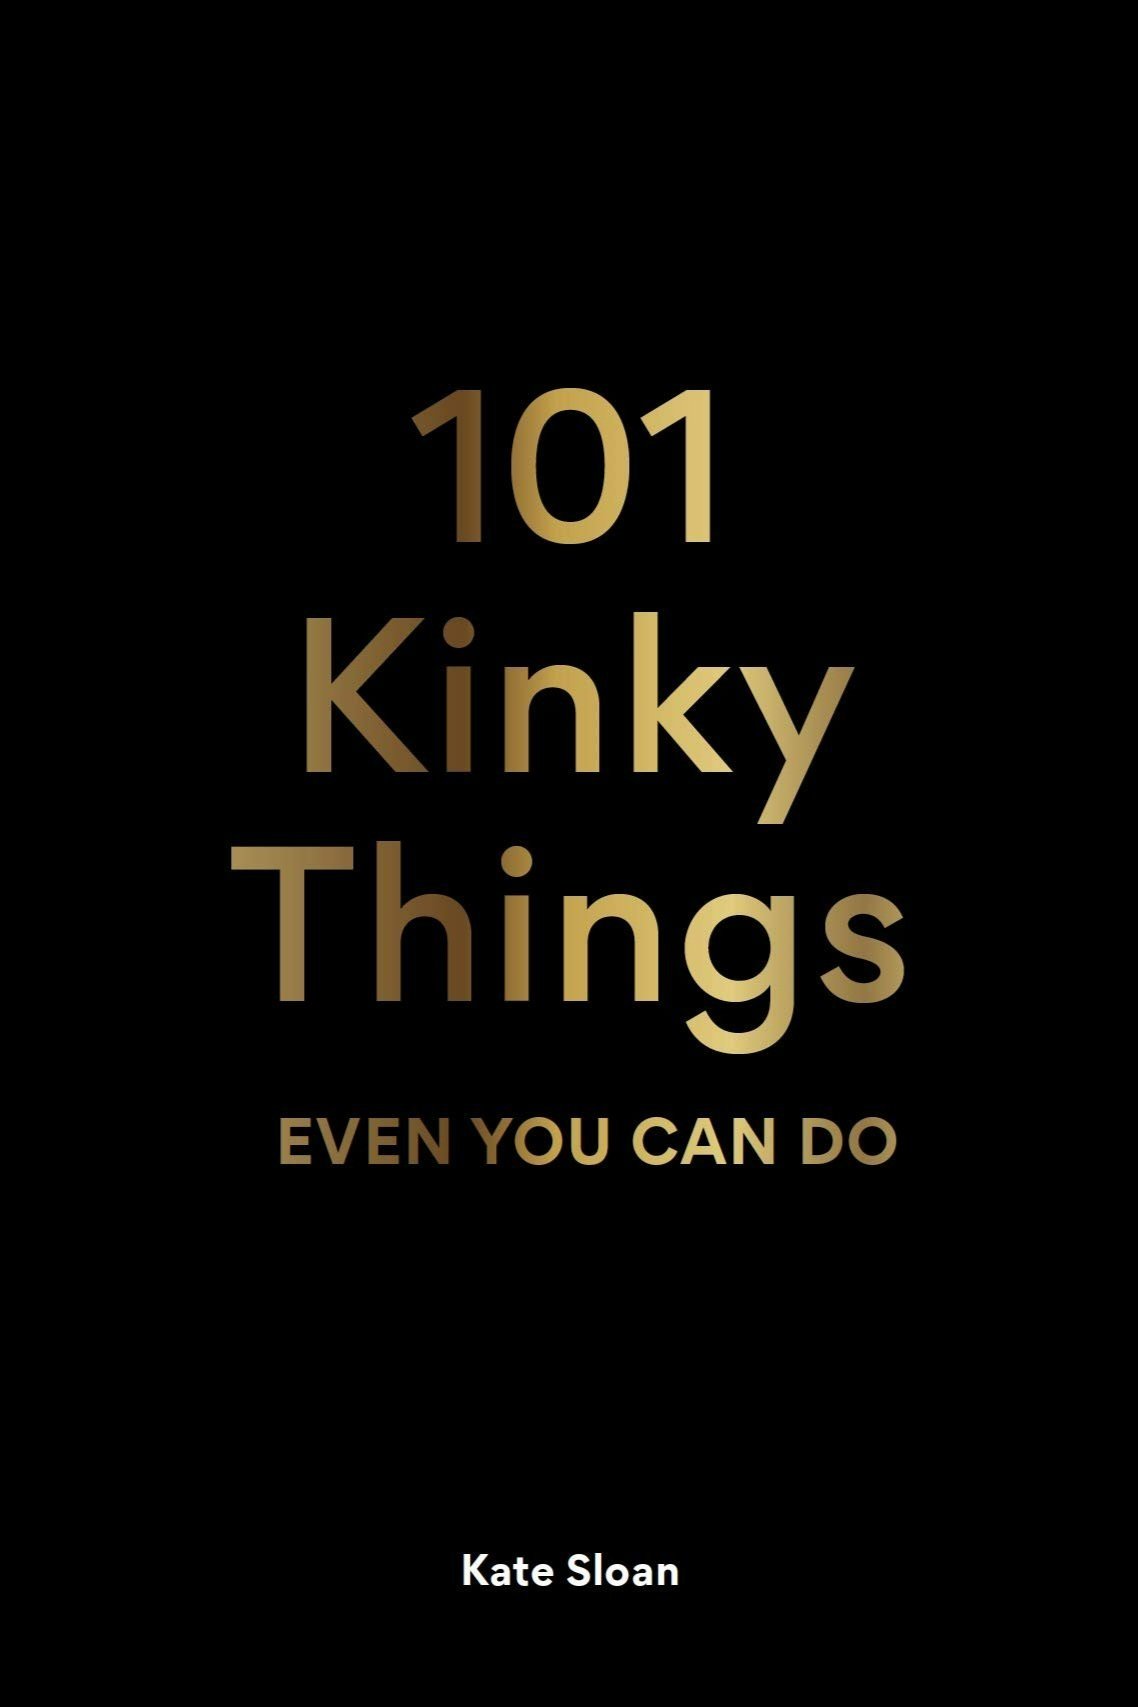 An accessible and fun guide to kinky practices for everyone